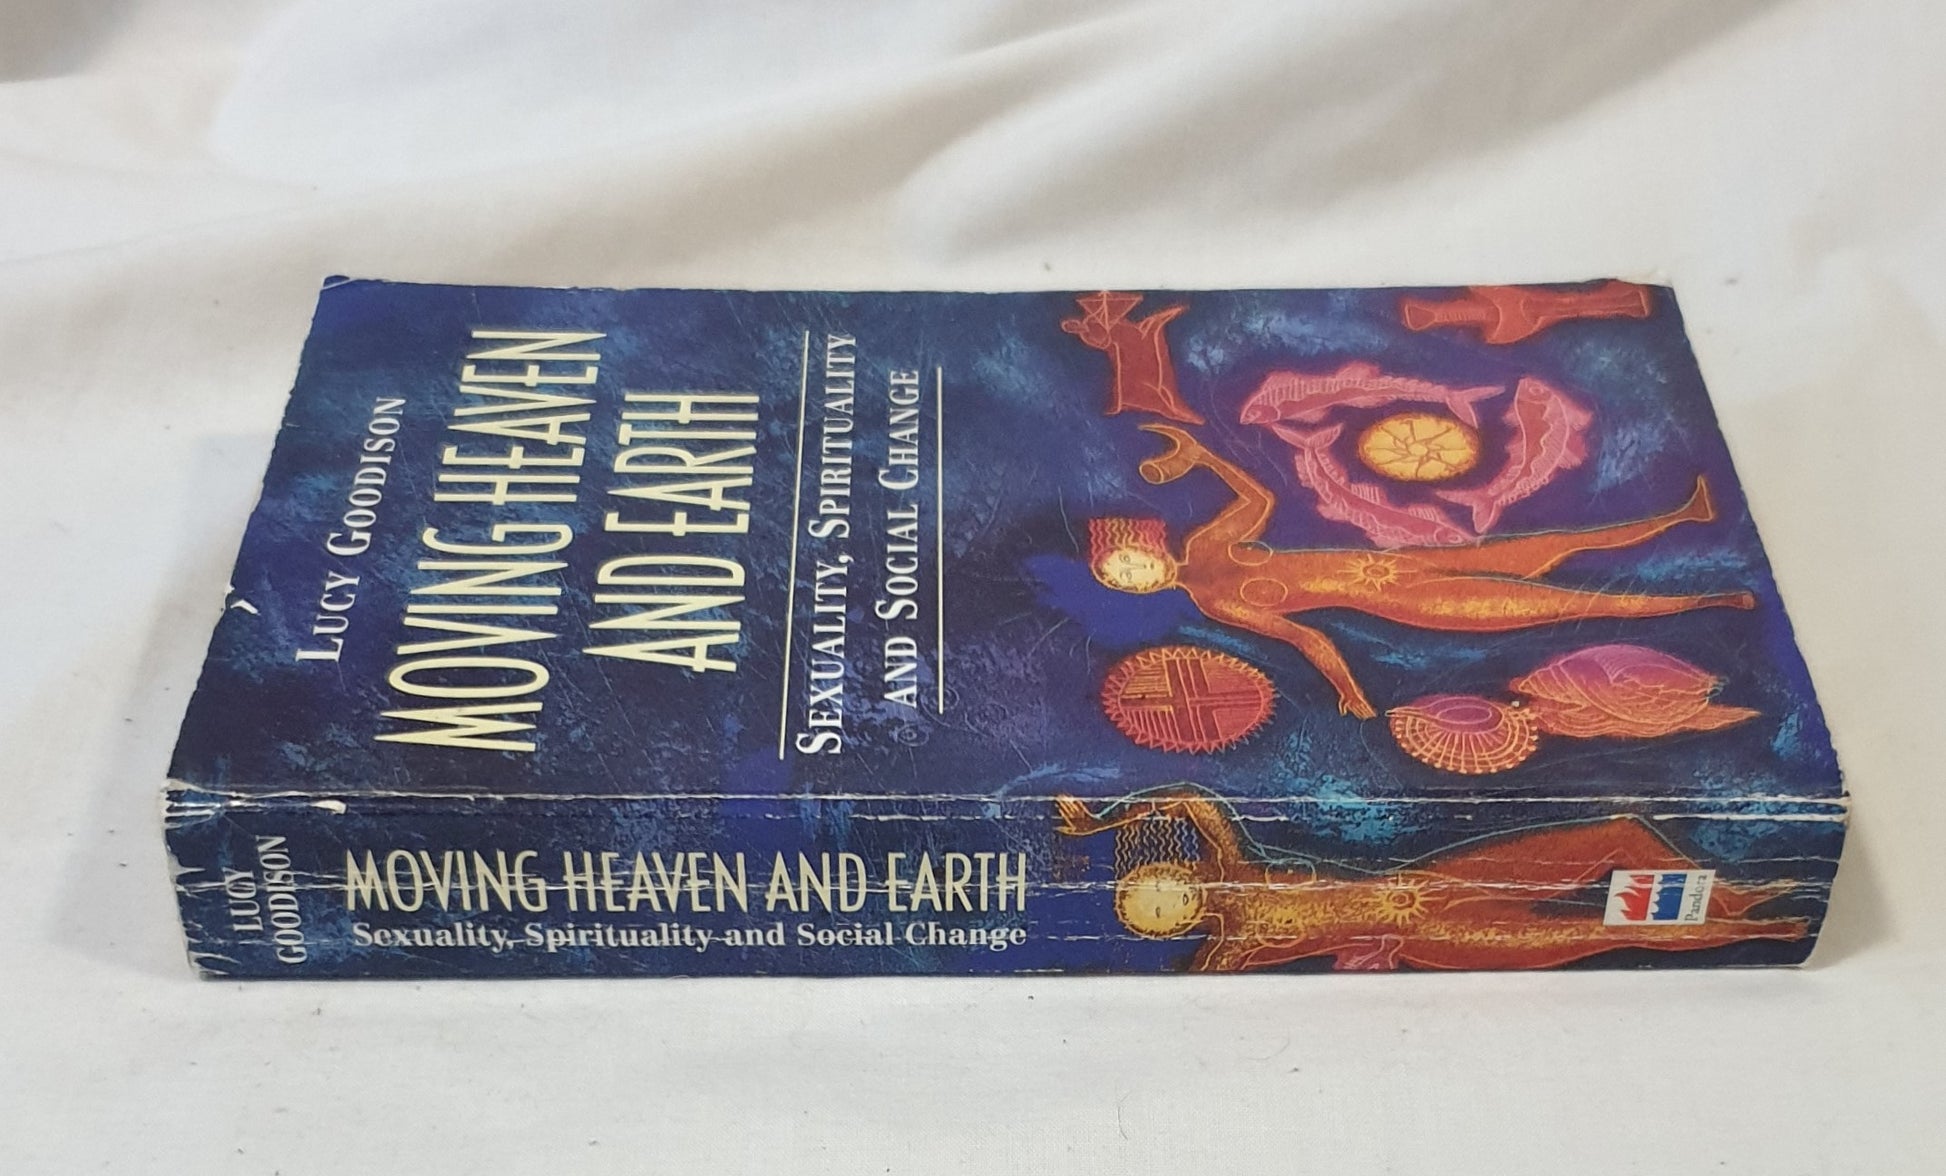 Moving Heaven and Earth  Sexuality, Spirituality and Social Change  by Lucy Goodison